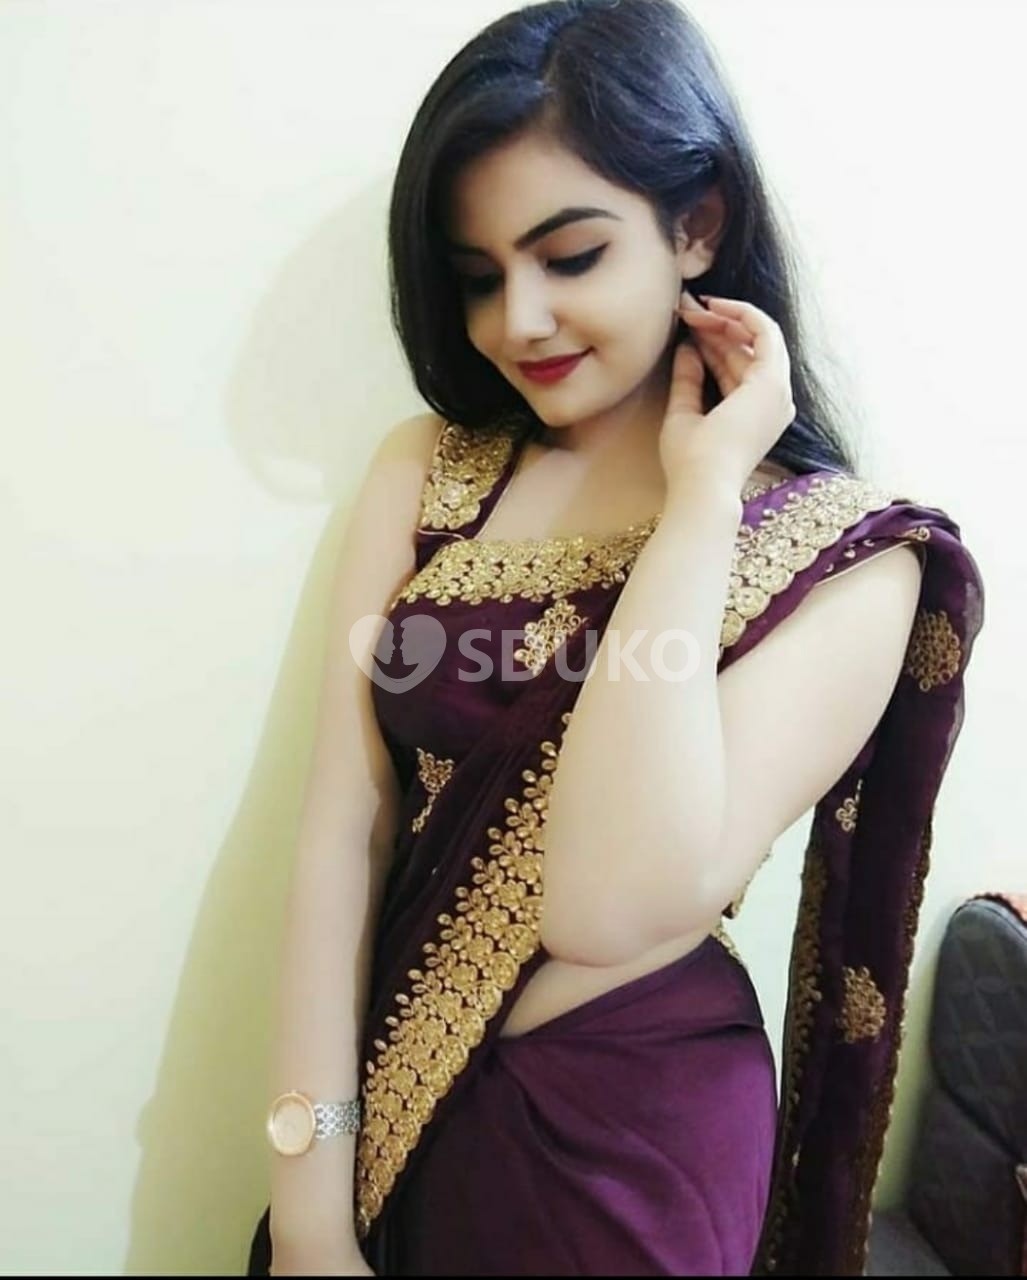 Patiala ☎️ VIP LOW RATE (Kavya) ESCORT FULL HARD FUCK WITH NAUGHTY IF YOU WANT TO FUCK MY PUSSY WITH BIG BOOBS GIRLS